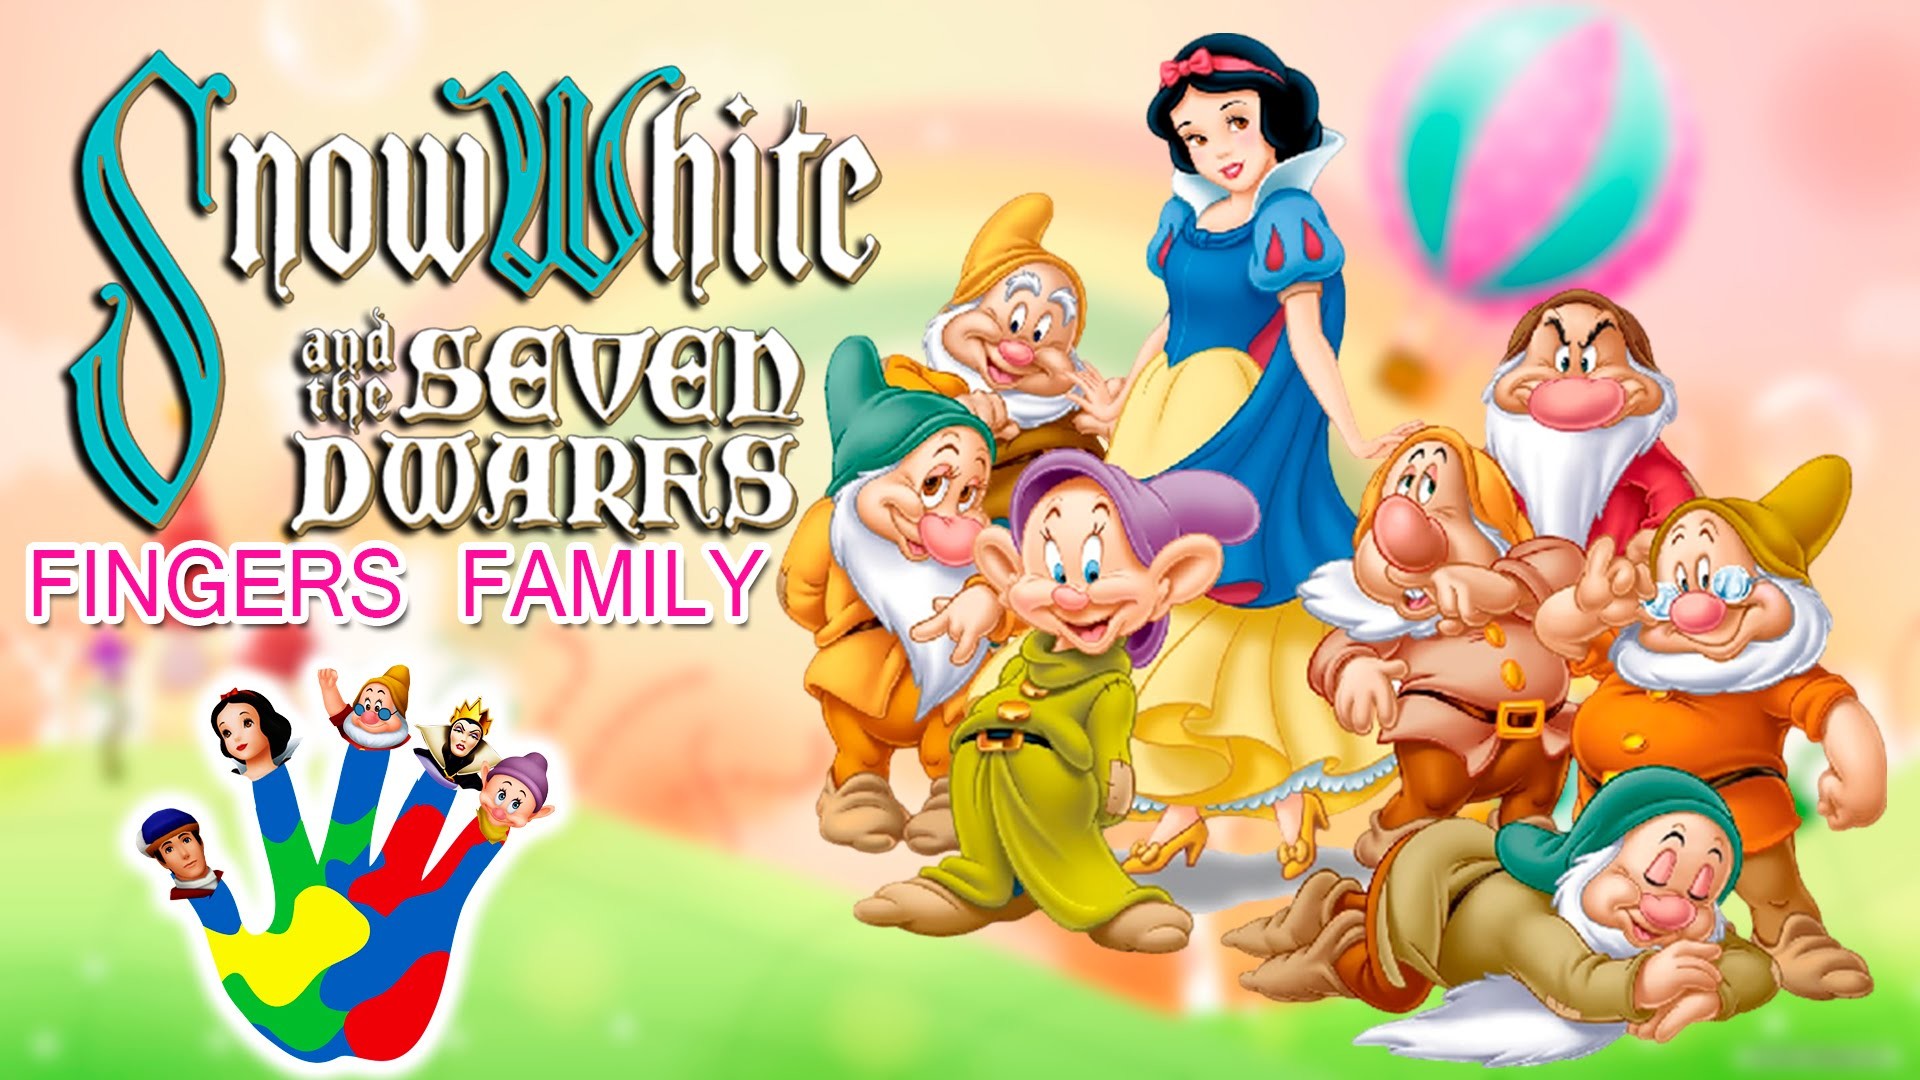 1920x1080 Snow White and the Seven Dwarfs Finger Family Nursery Rhymes | Ozu Kids  Rhymes |